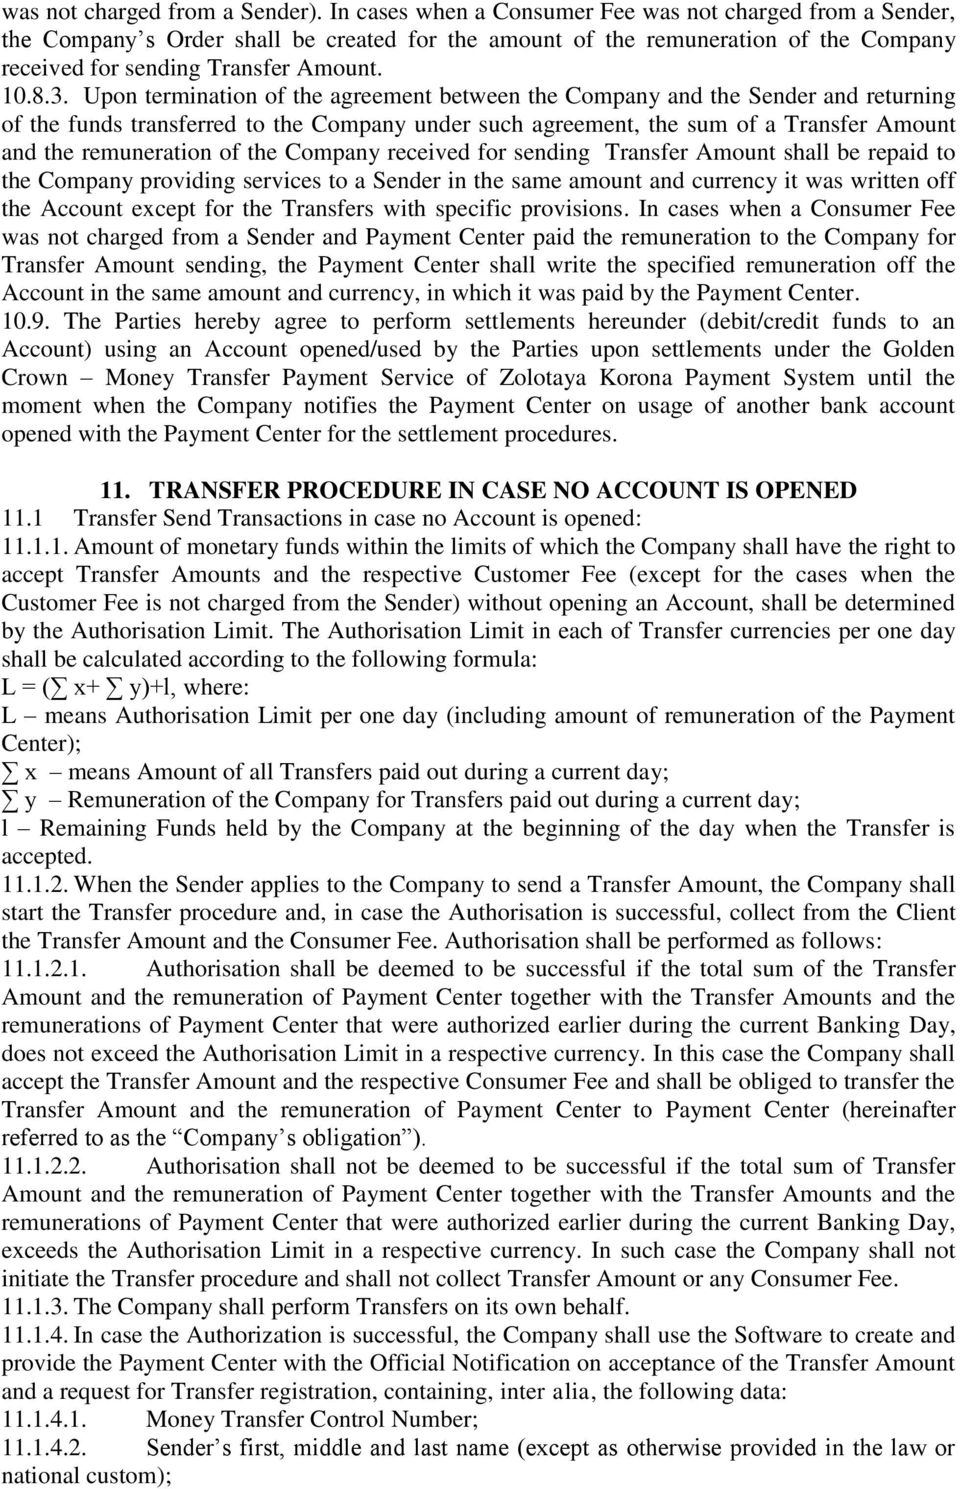 Upon termination of the agreement between the Company and the Sender and returning of the funds transferred to the Company under such agreement, the sum of a Transfer Amount and the remuneration of